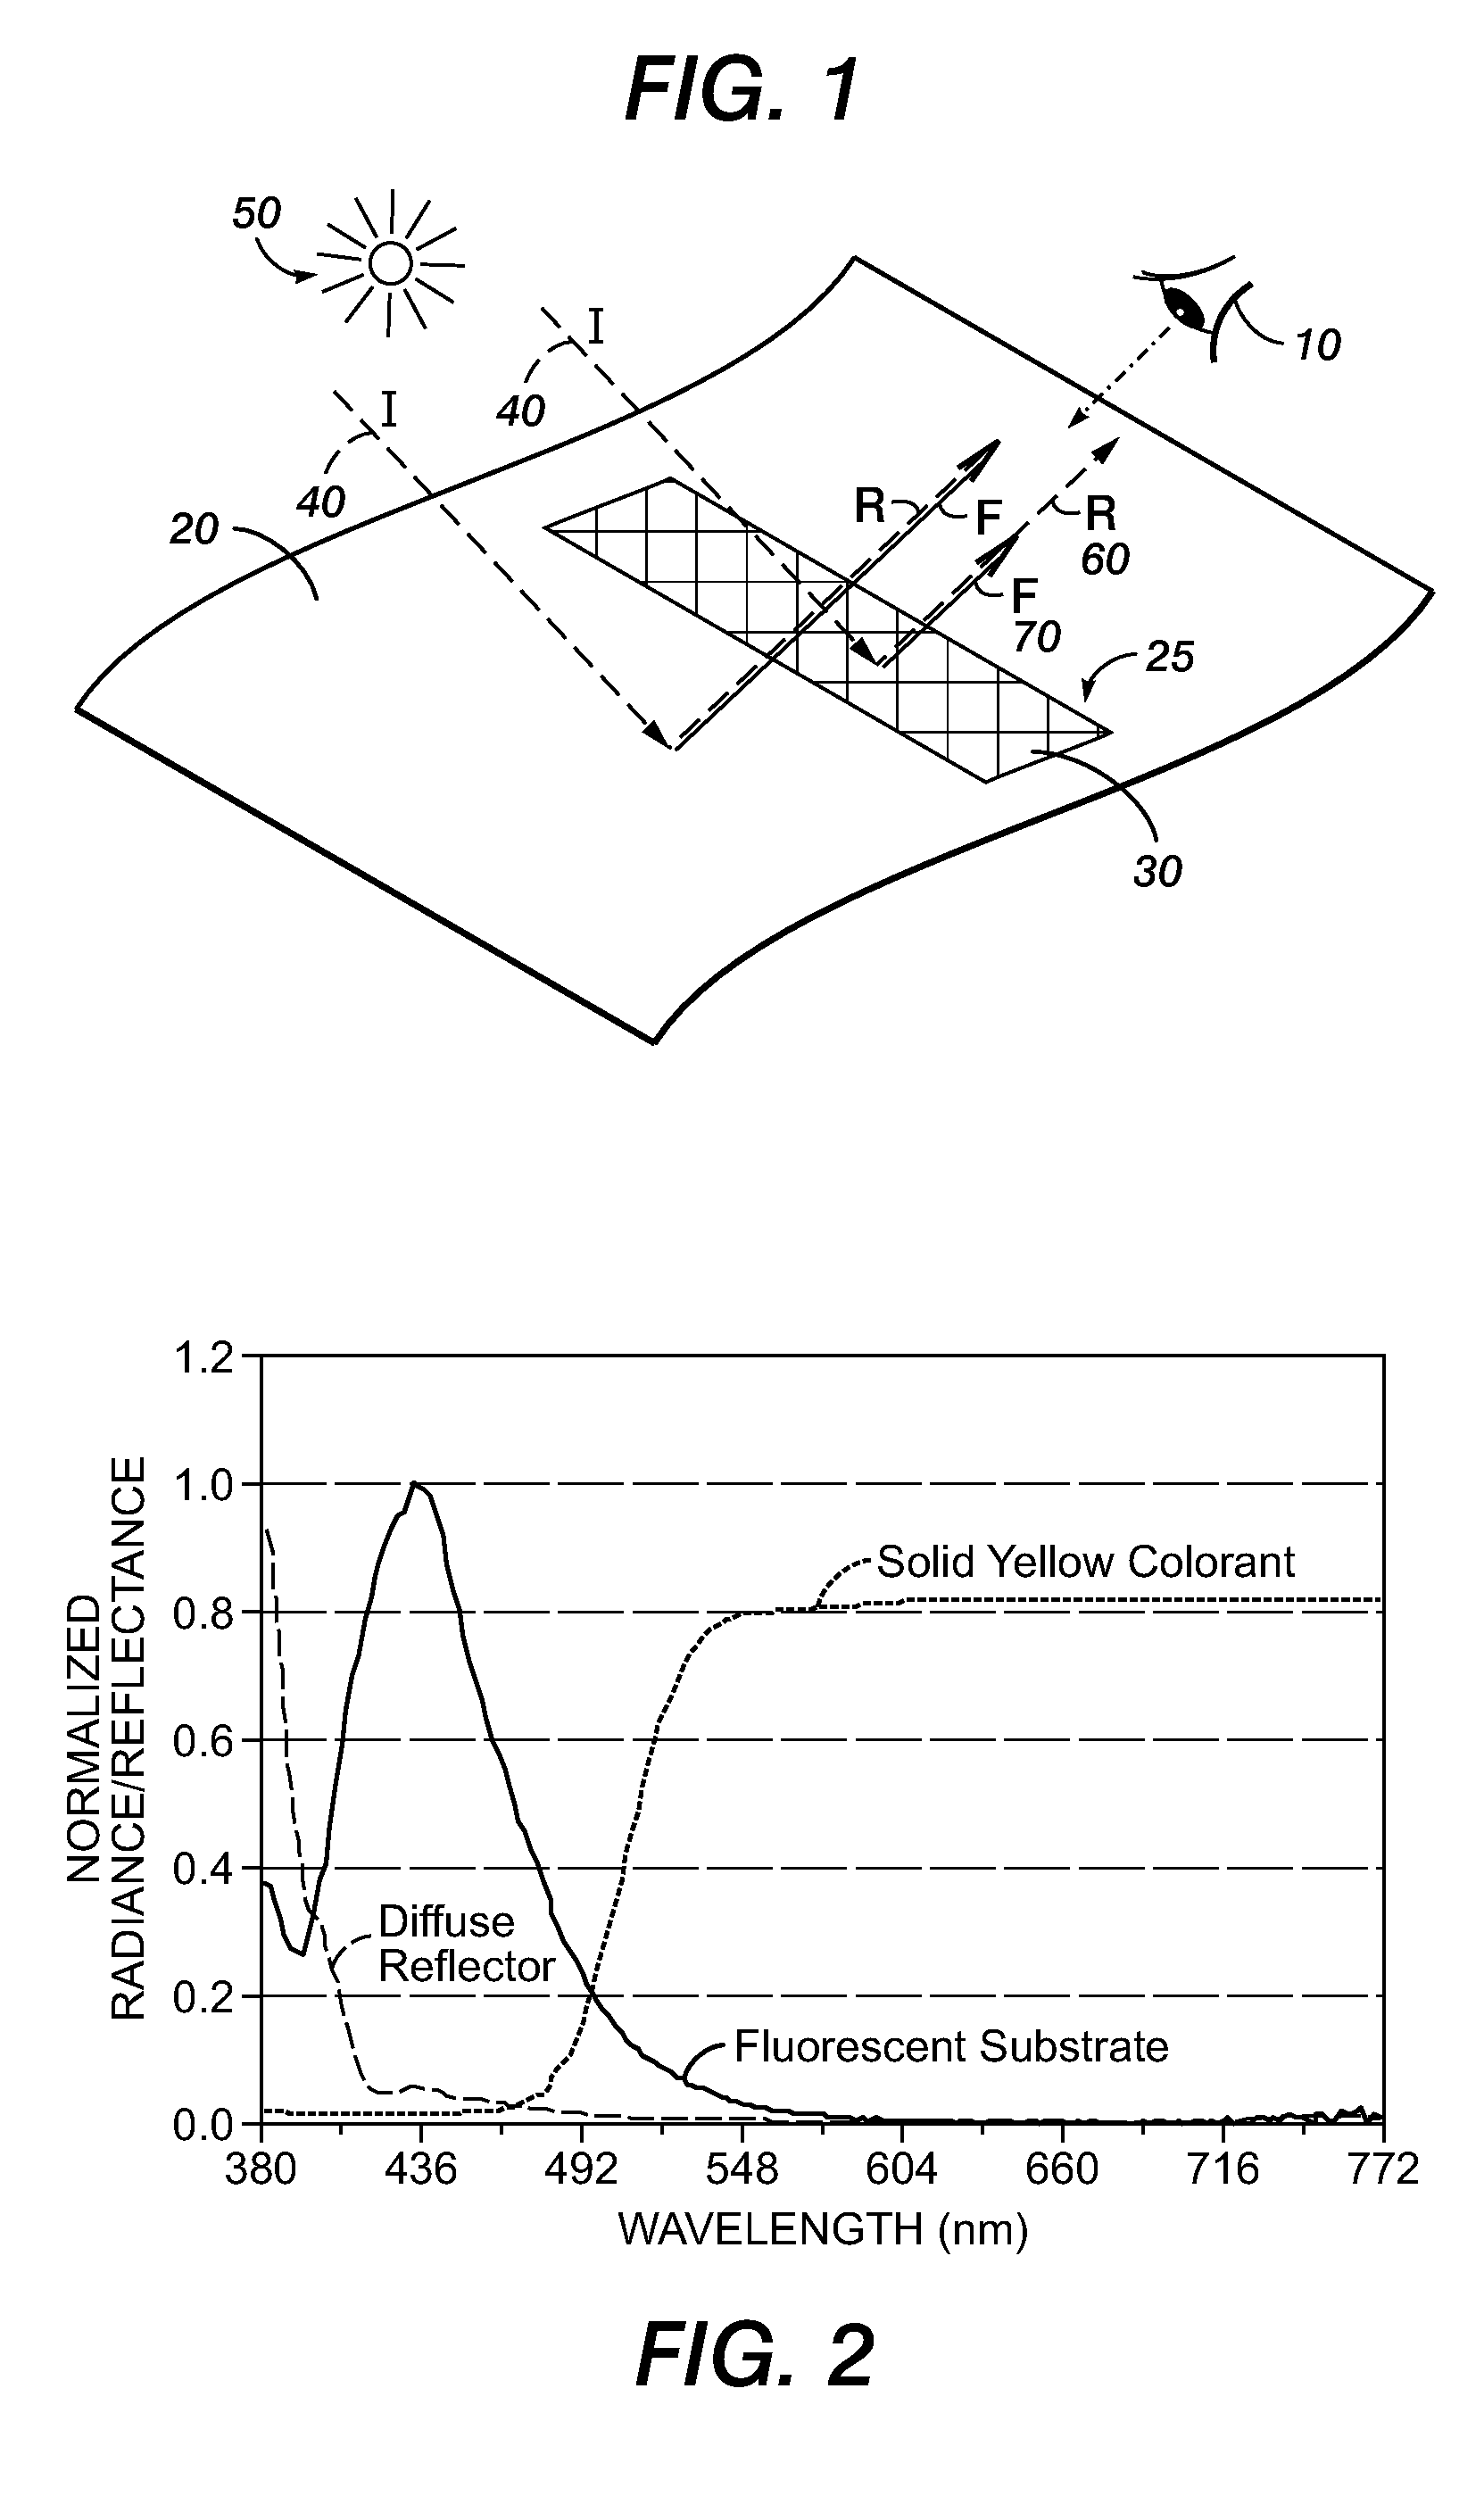 Substrate fluorescence mask for embedding information in printed documents